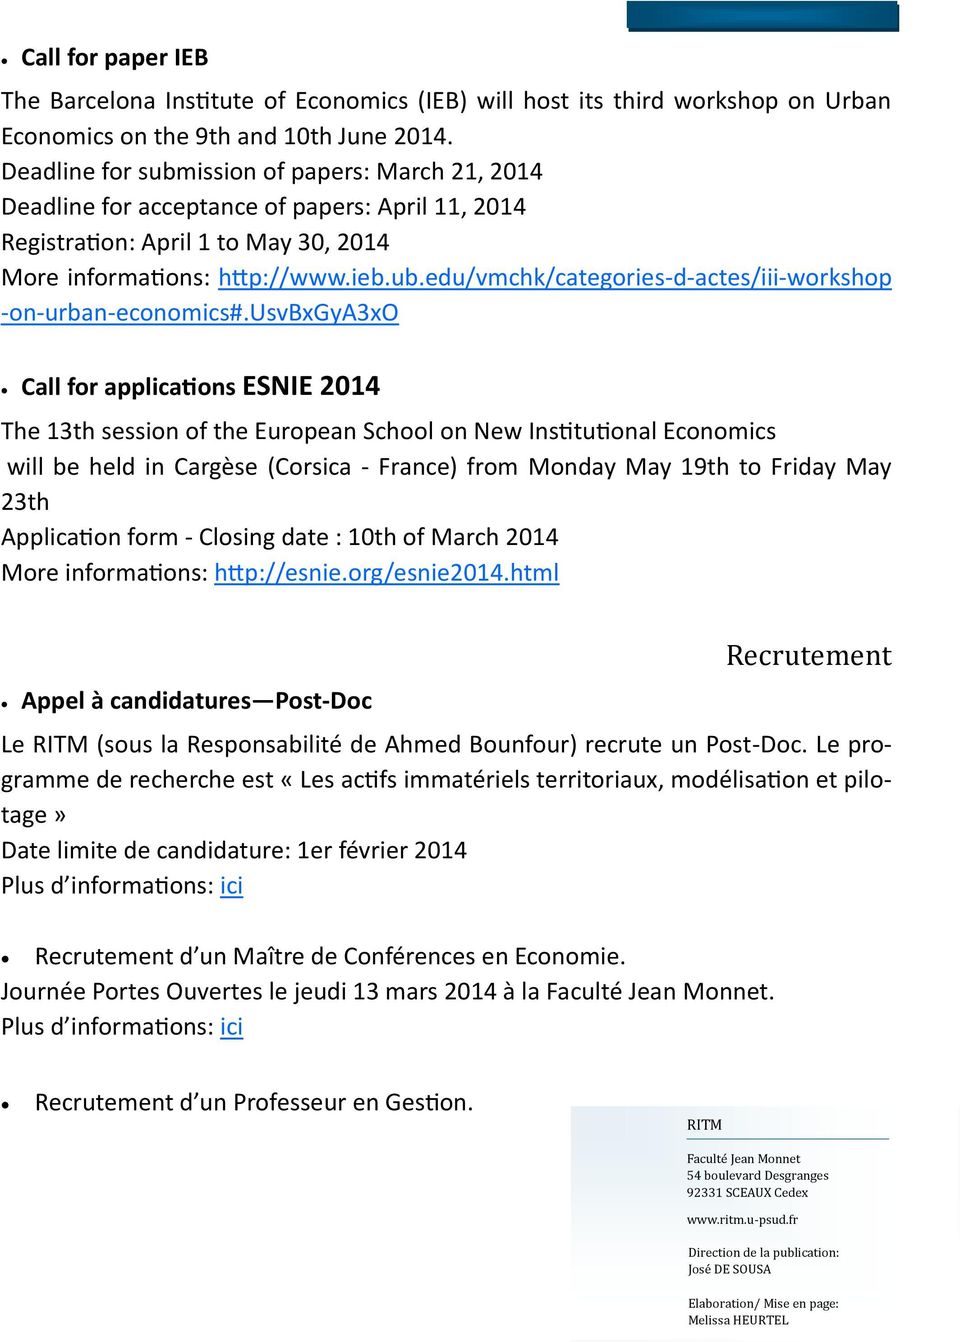 usvbxgya3xo Call for applications ESNIE 2014 The 13th session of the European School on New Institutional Economics will be held in Cargèse (Corsica - France) from Monday May 19th to Friday May 23th